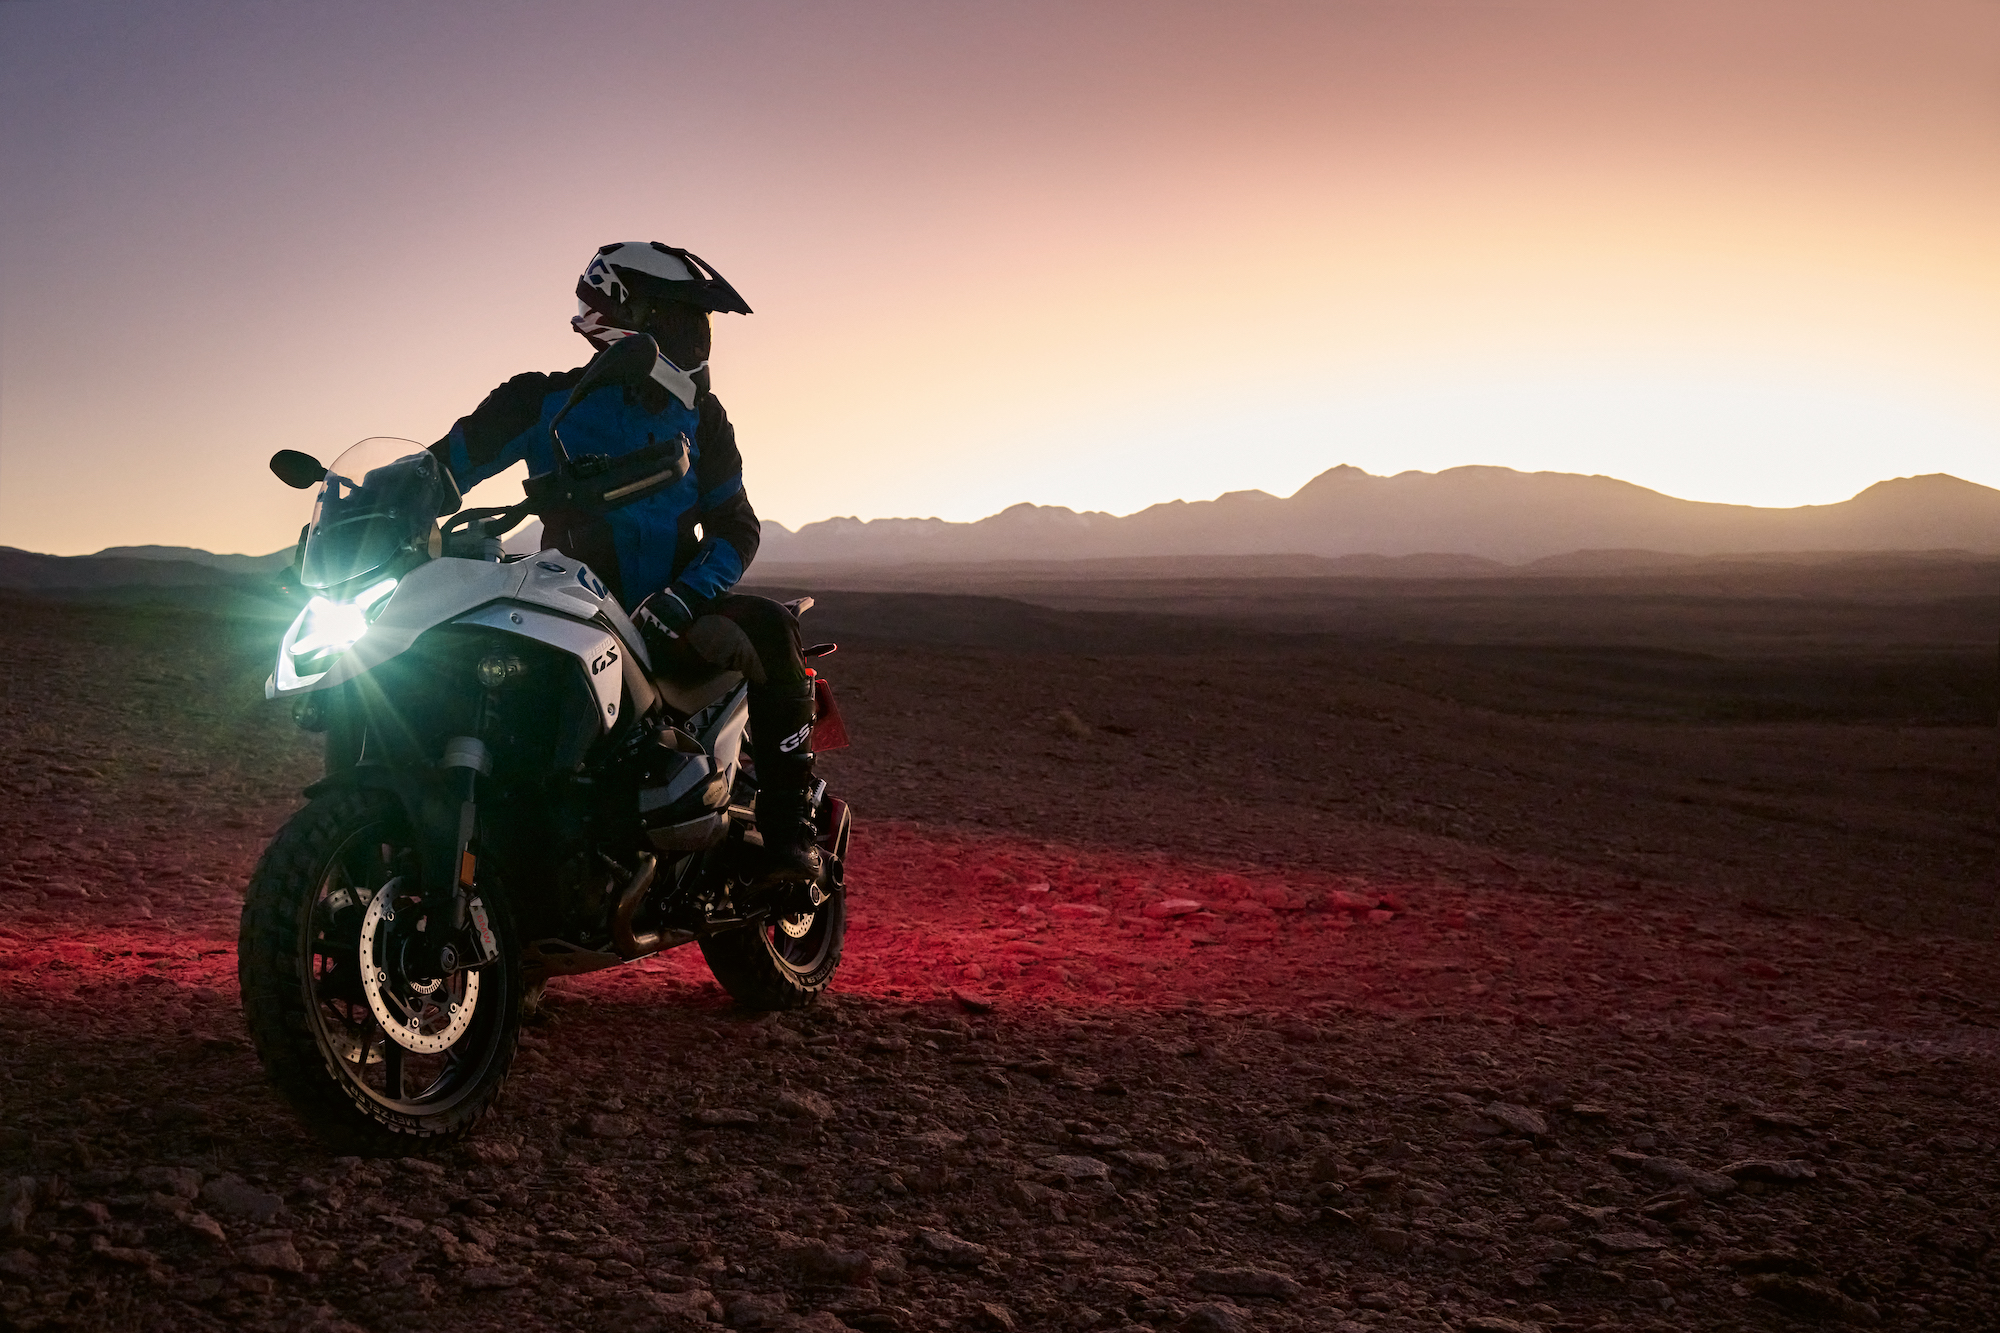 A view of BMW's all-new R 1300 GS, which houses the brand's most powerful boxer ever. All media provided by BMW Motorrad.